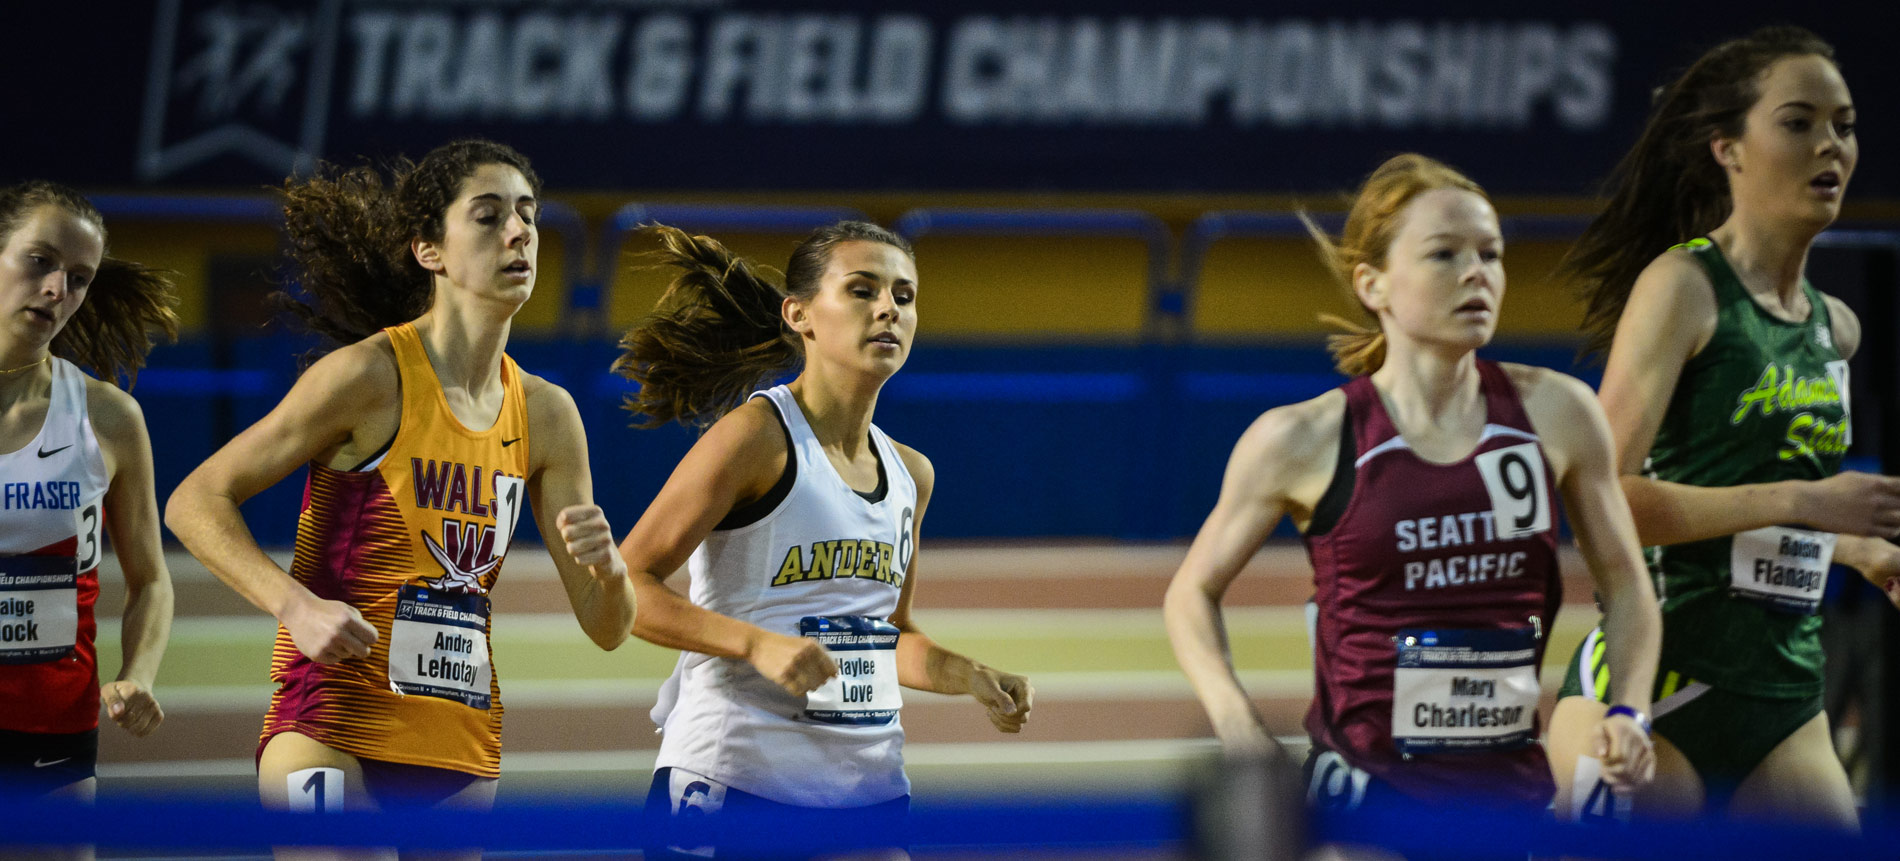 Love Finishes 14th at NCAA Division II Women's Indoor Track and Field Championships